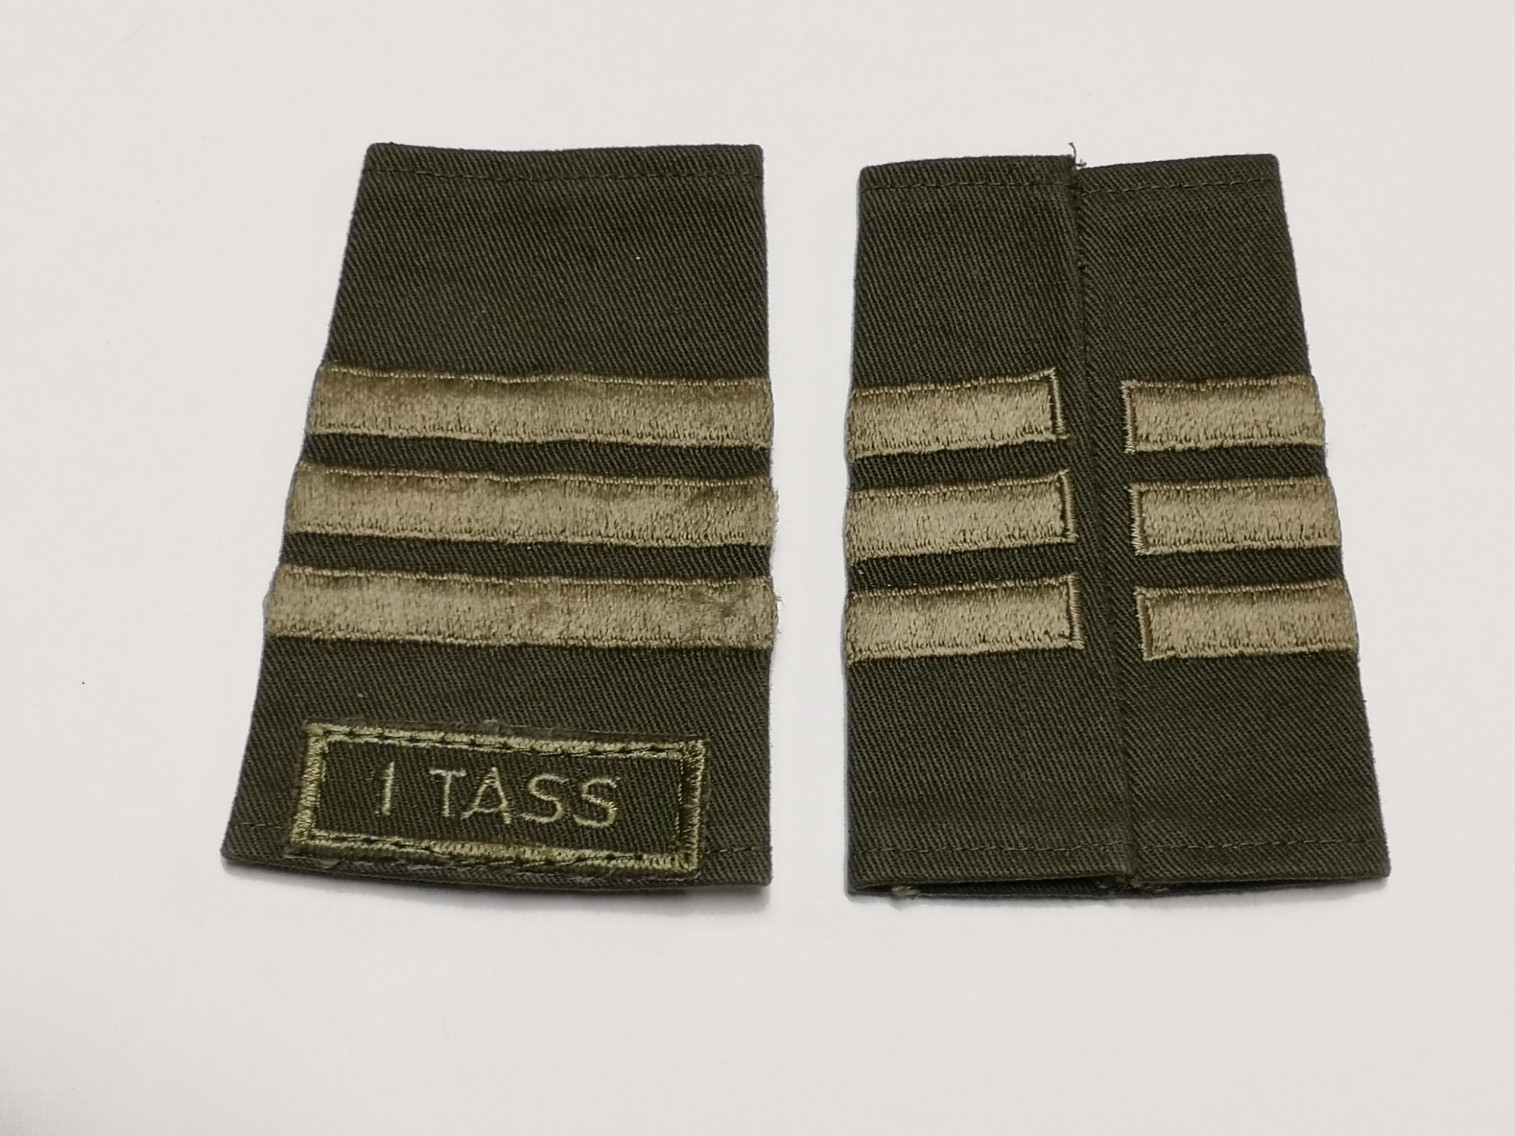 Canadian Armed Forces Green Rank Epaulets 1 TASS - Lieutenant-Colonel